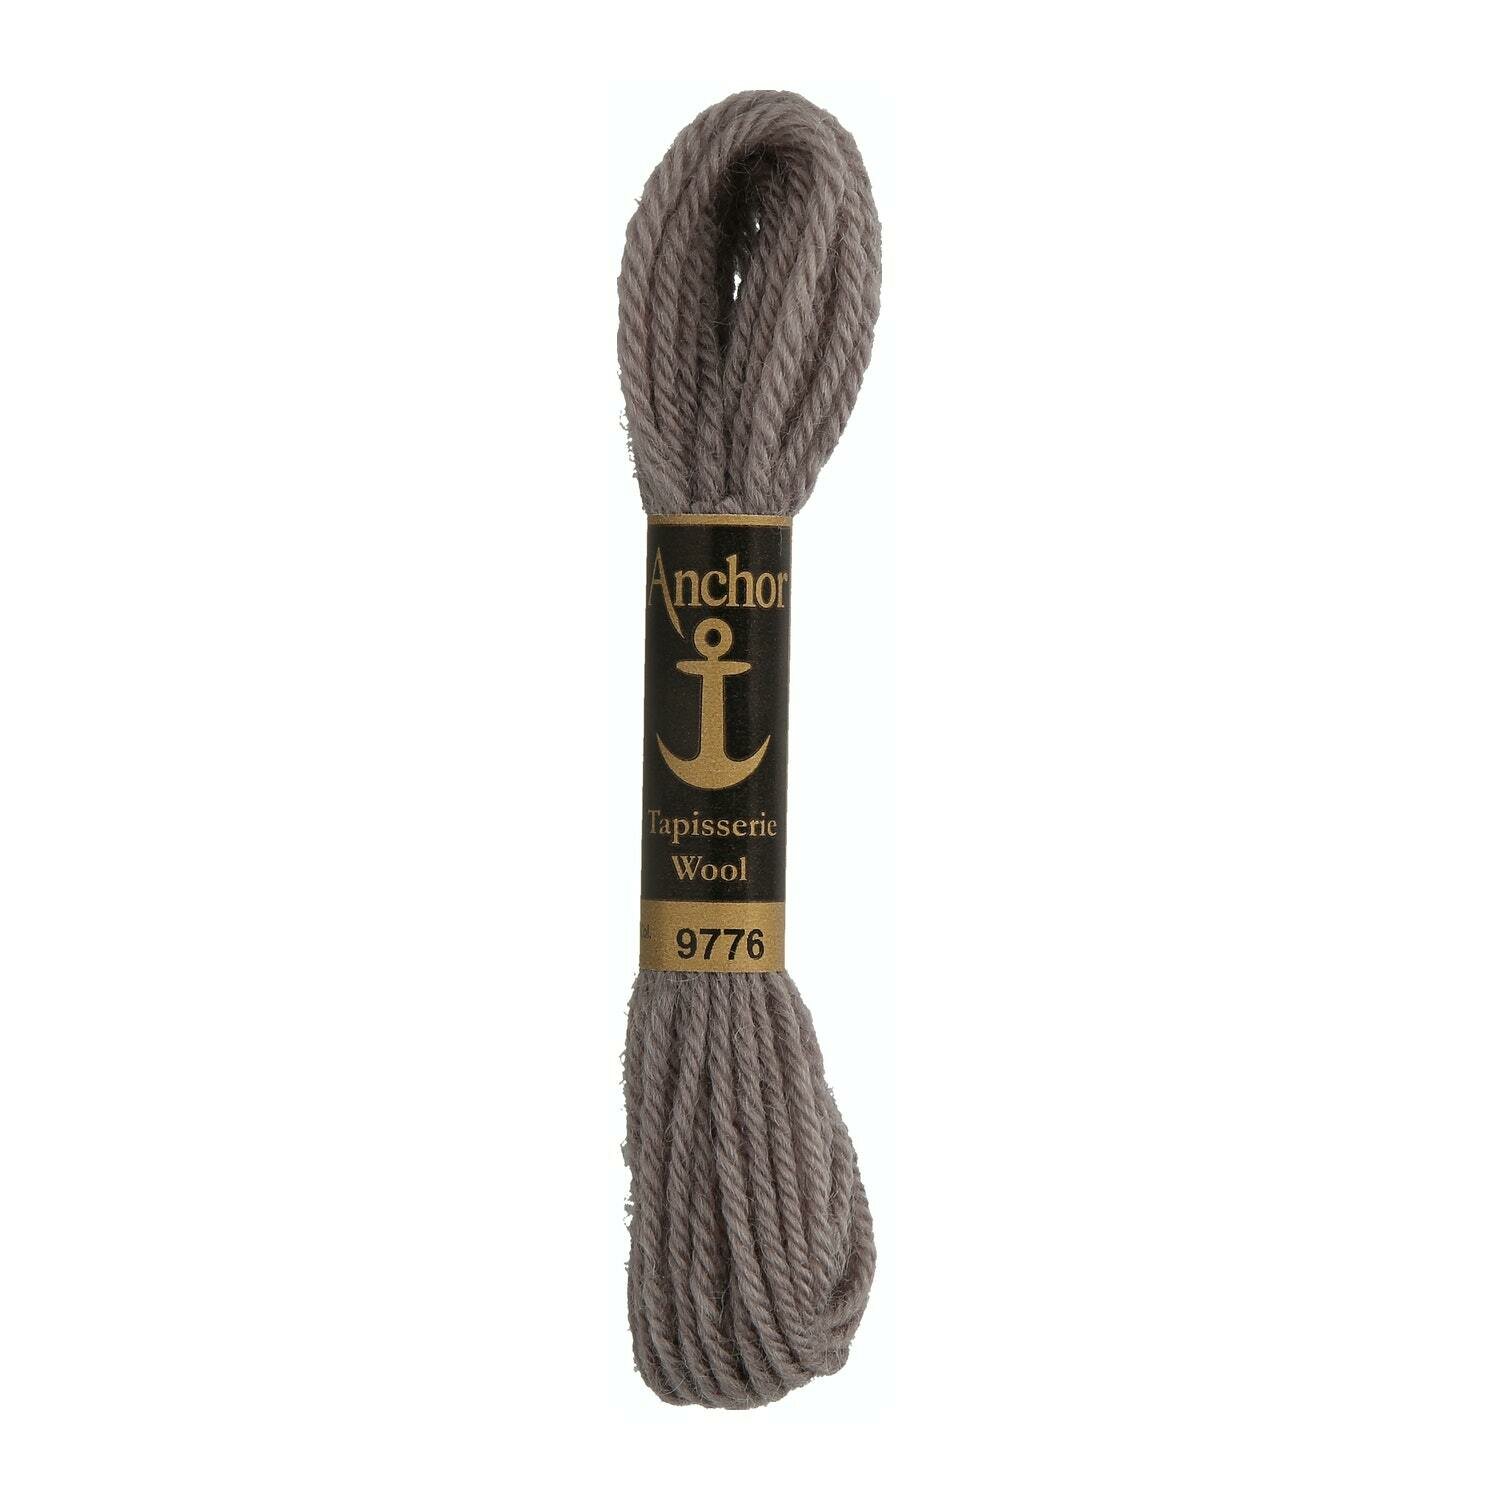 Anchor Tapisserie Wool # 09776